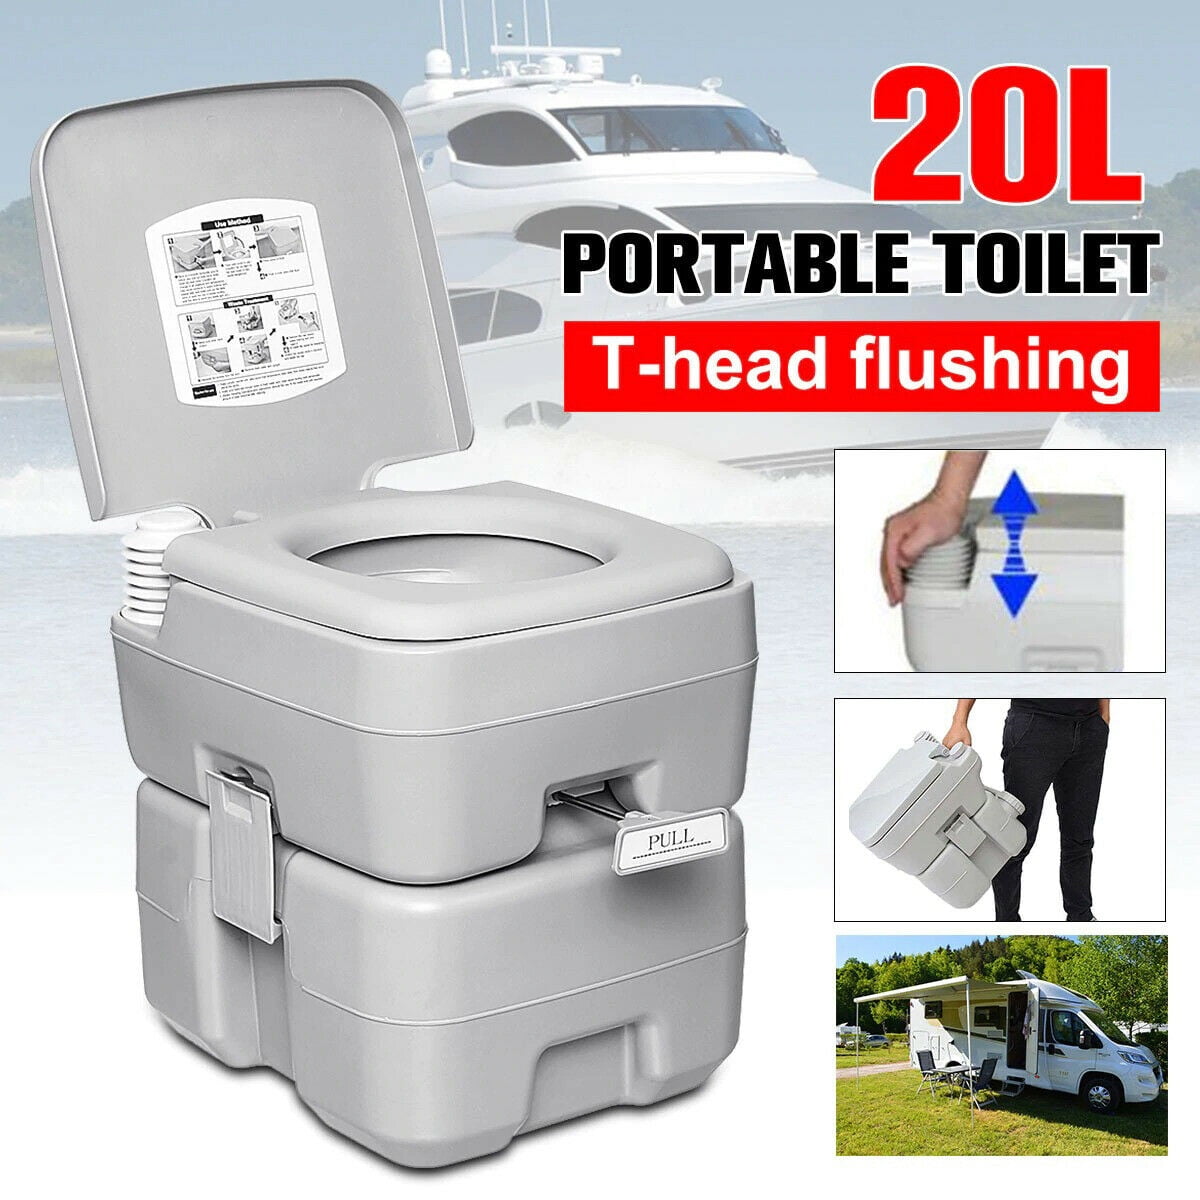 Caravan Campsite for Adult and Kids,Large Boat Outdoor Indoor Travel Potty Camping Portable Toilet for Car 142714 MPM 2.8 Gallon 10L Flush Porta Potti Gray 